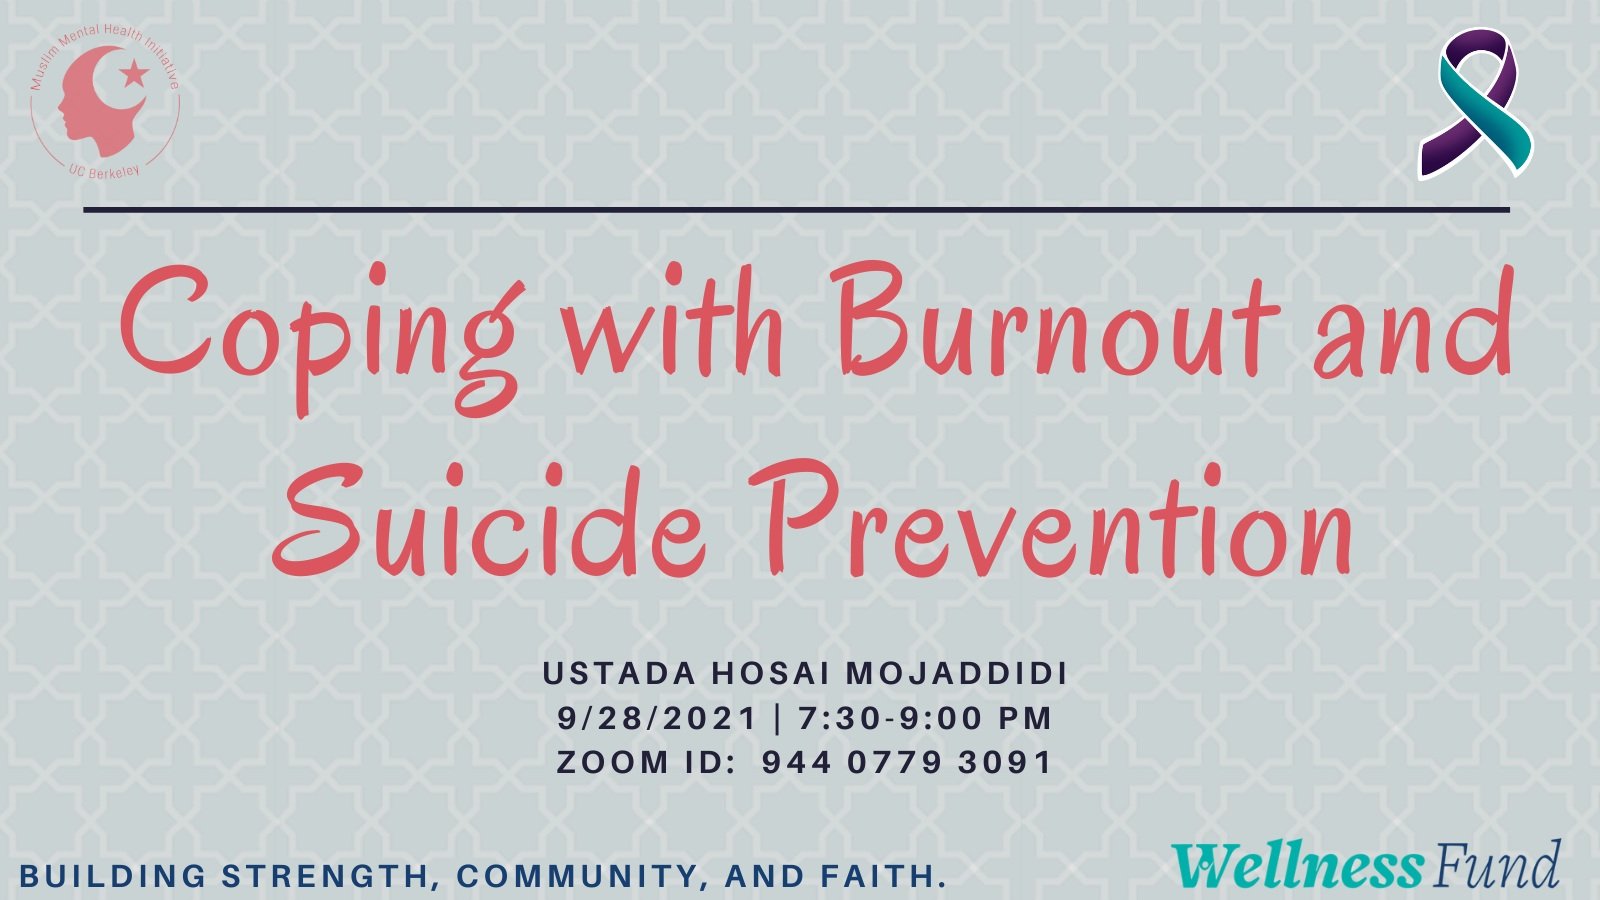 09/28/21 Coping with Burnout and Suicide Prevention - Ustadha Hosai Mojaddidi